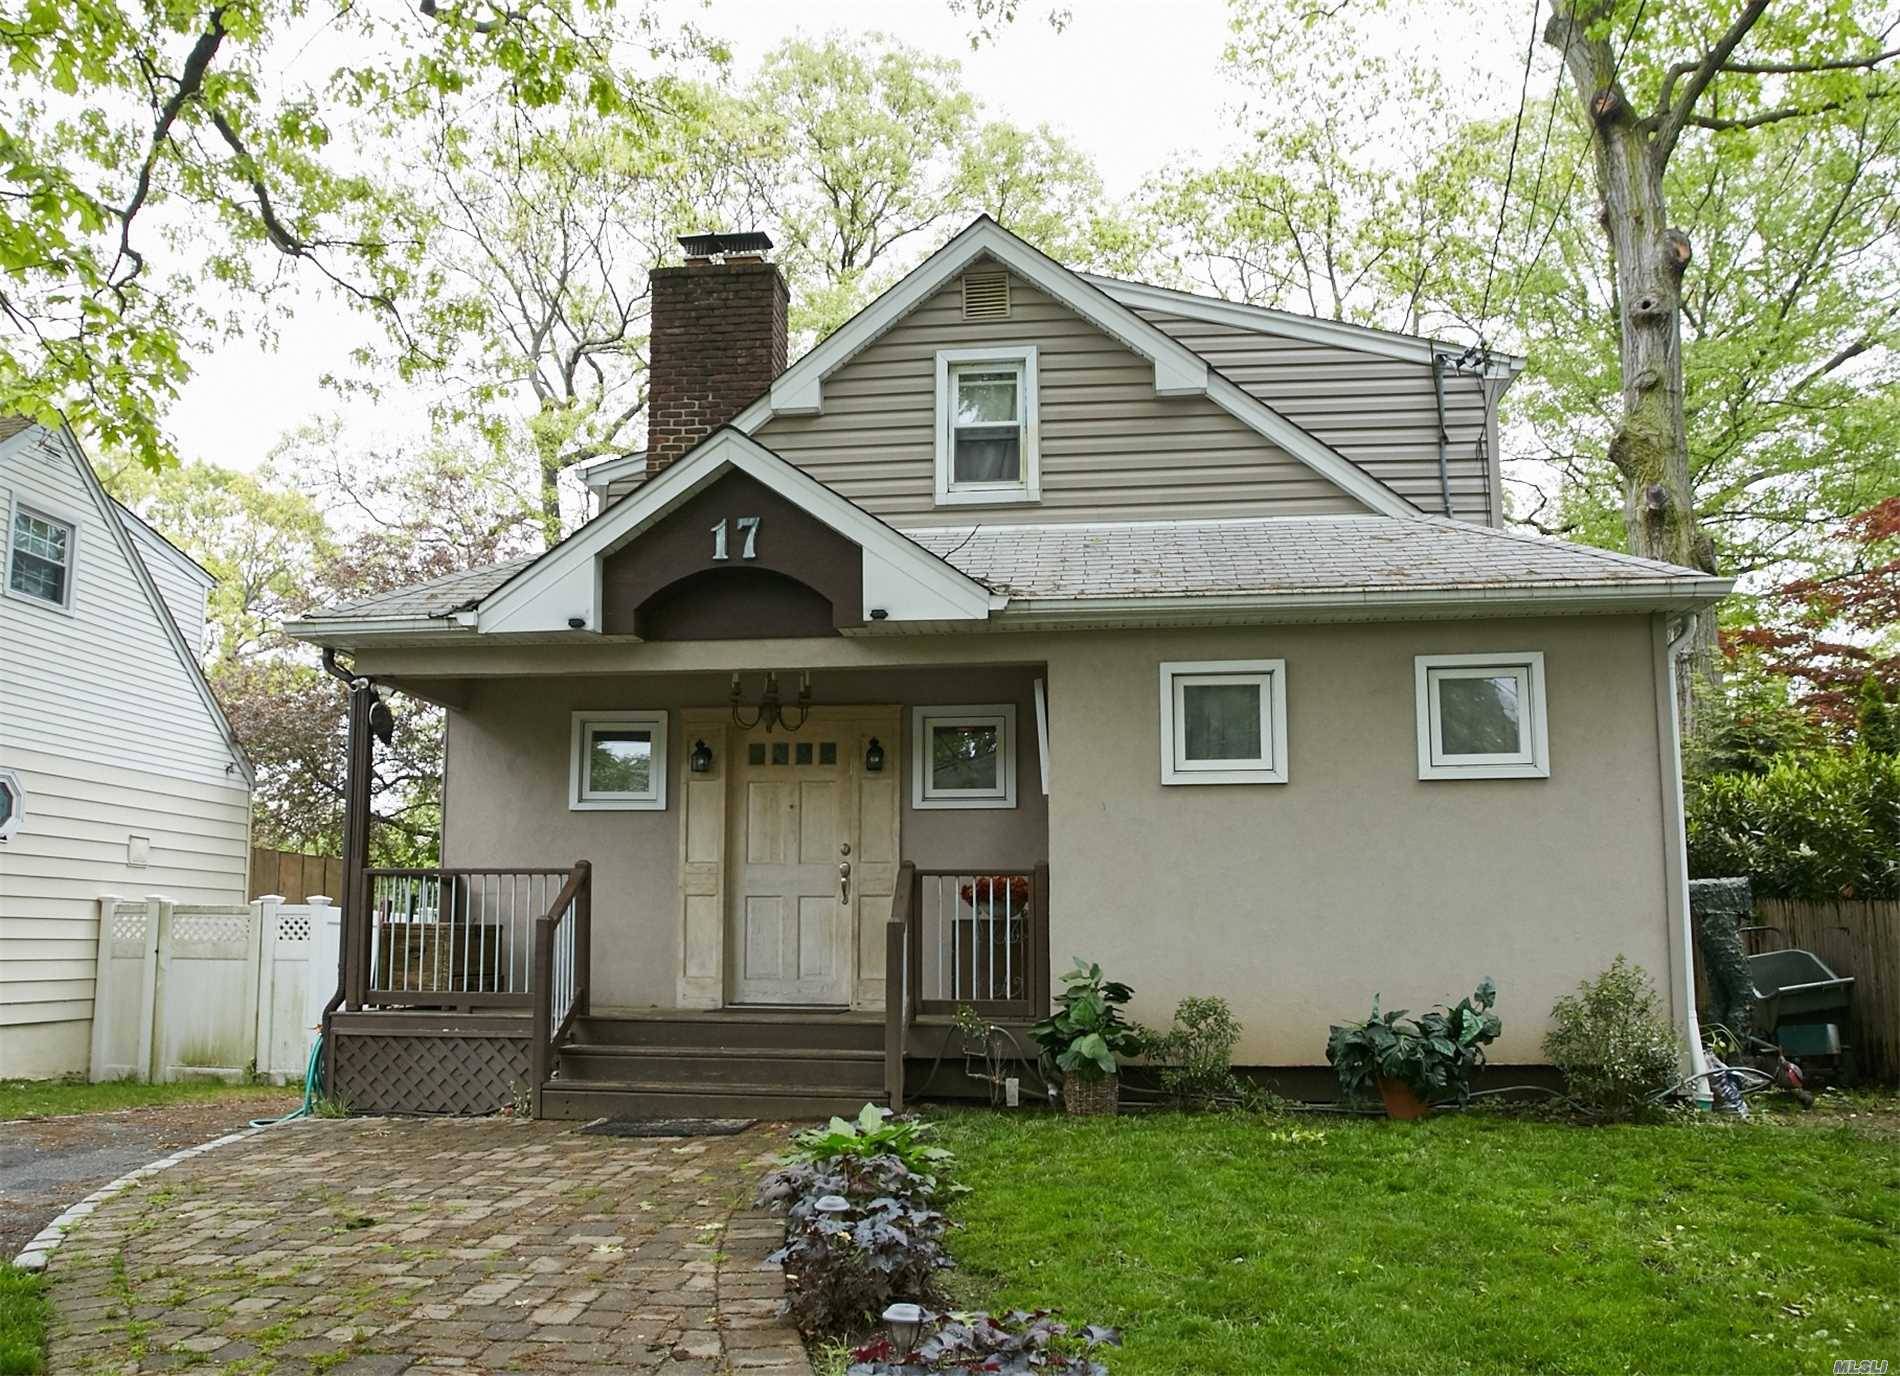 Beautifully Renovated Cape Cod Situated On a Quiet Tree Lined Street.